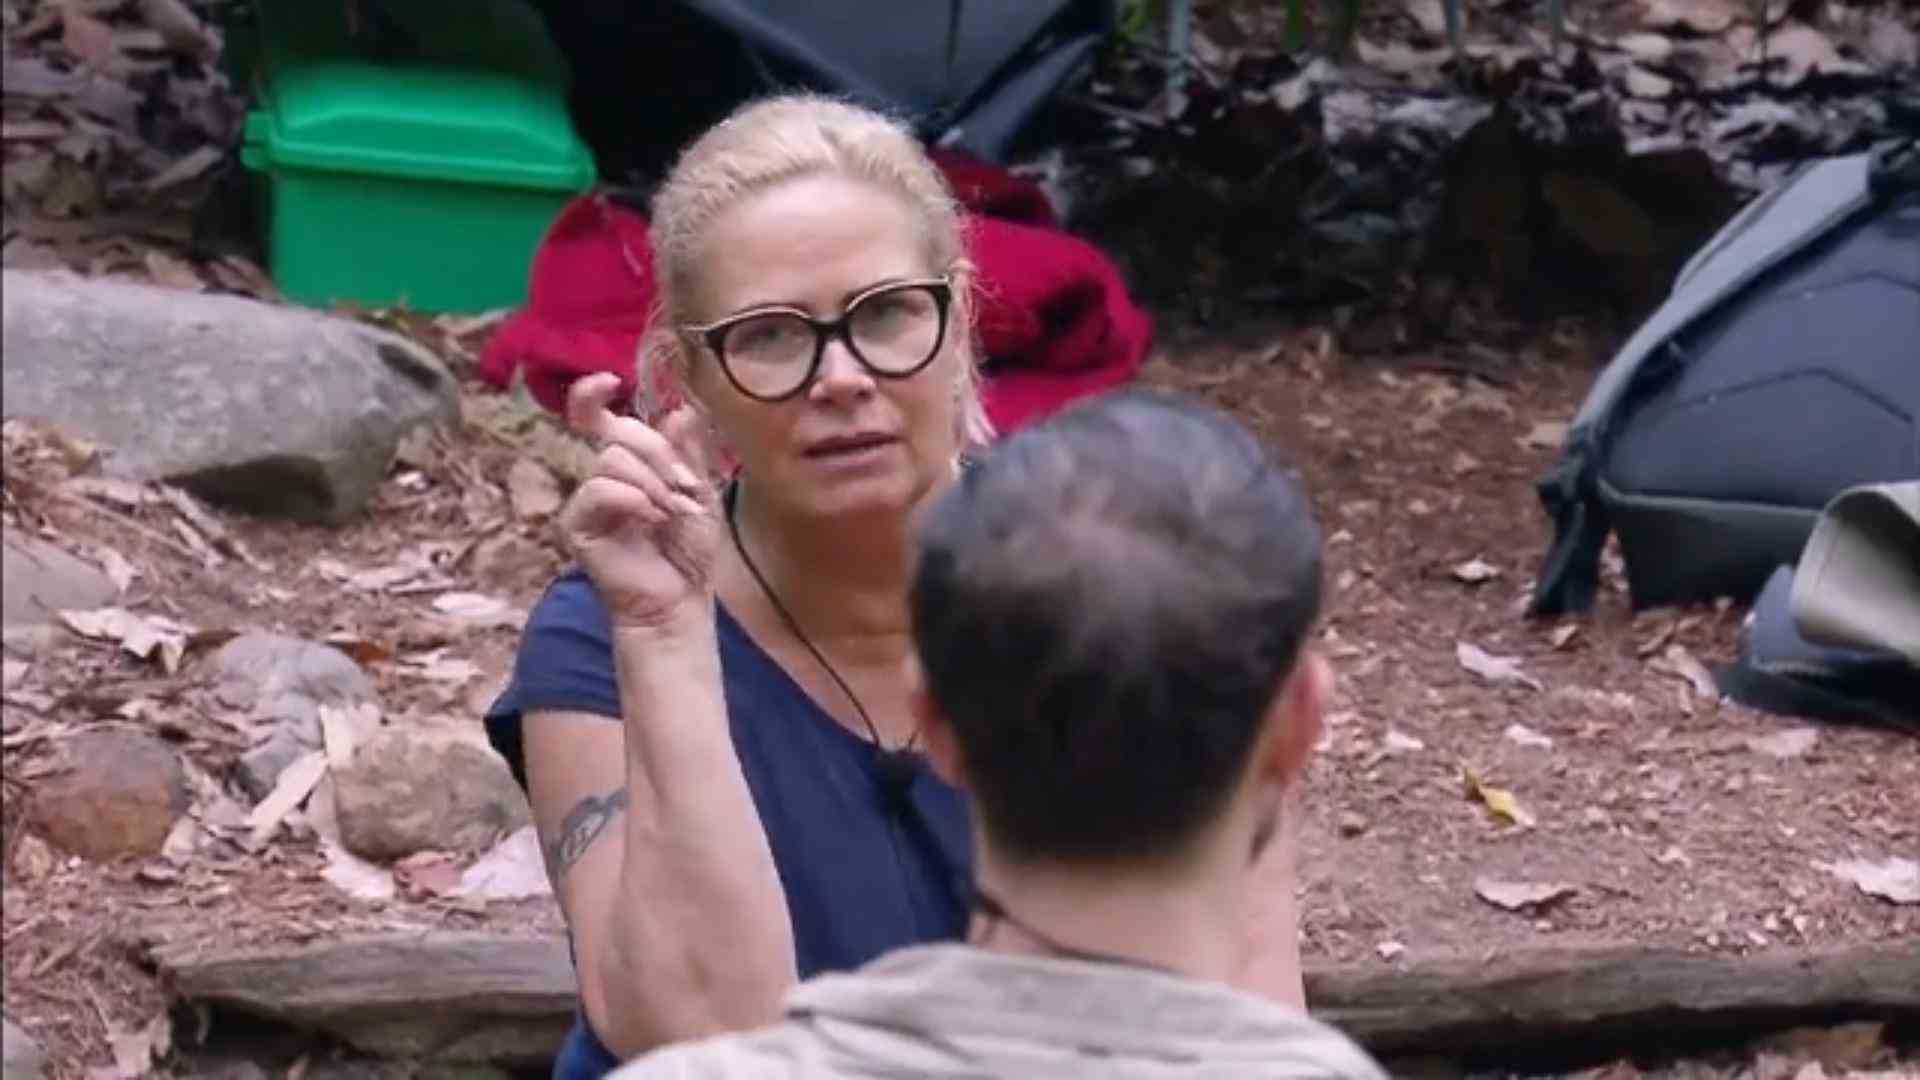 Gigi doesn't like Claudia's Bolognese lie at all The Bolo bomb continues to tick in the jungle camp